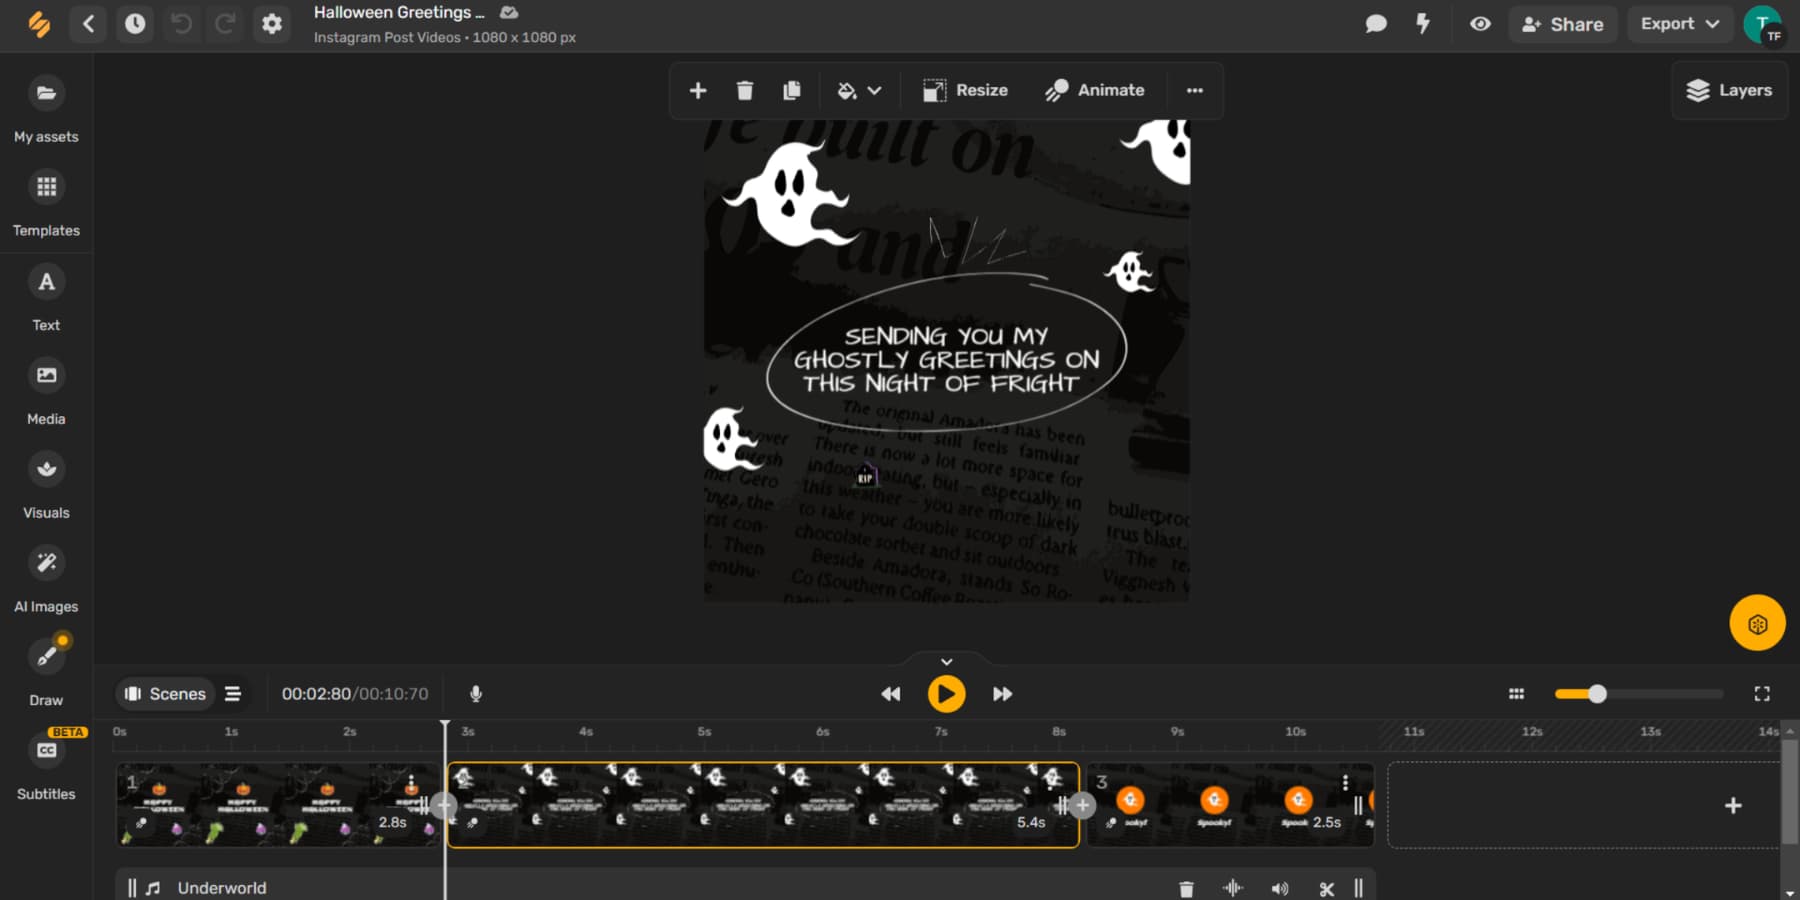 A screenshot of Simplified's Video creation tool